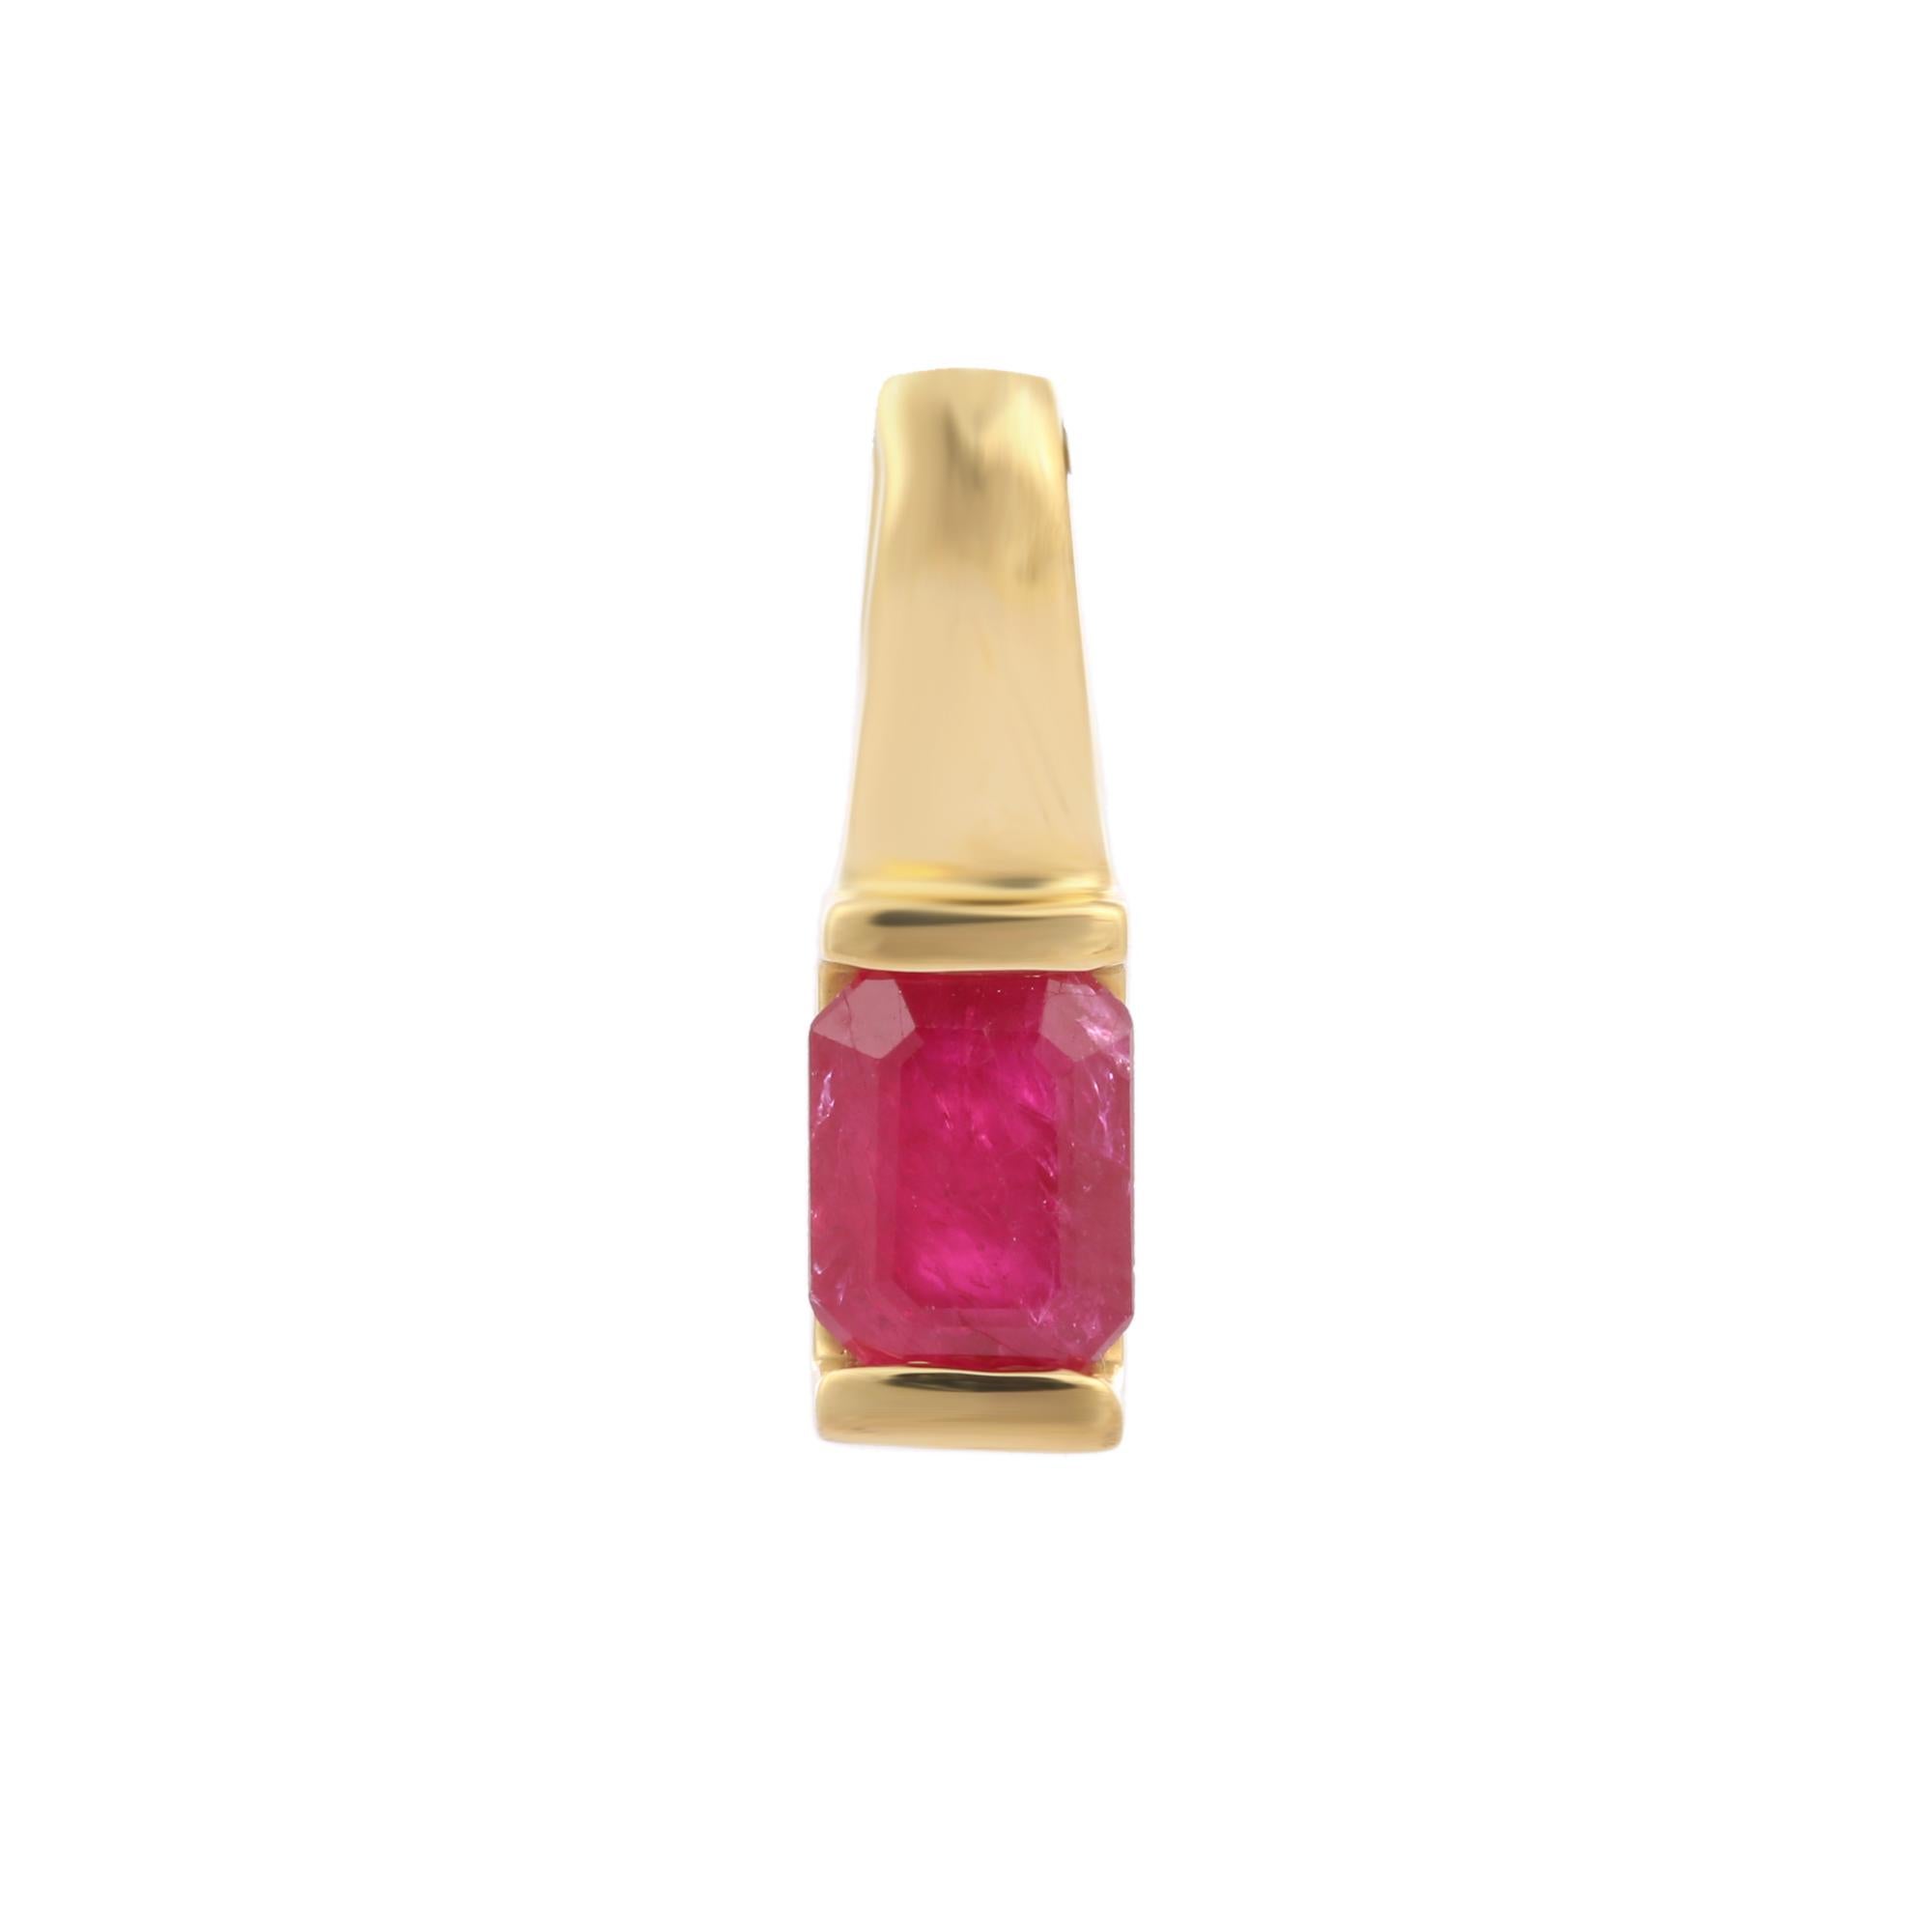 Modern everyday ruby pendant in 18K Gold. It has a cushion cut ruby that completes your look with a decent touch. Pendants are used to wear or gifted to represent love and promises. It's an attractive jewelry piece that goes with every basic outfit